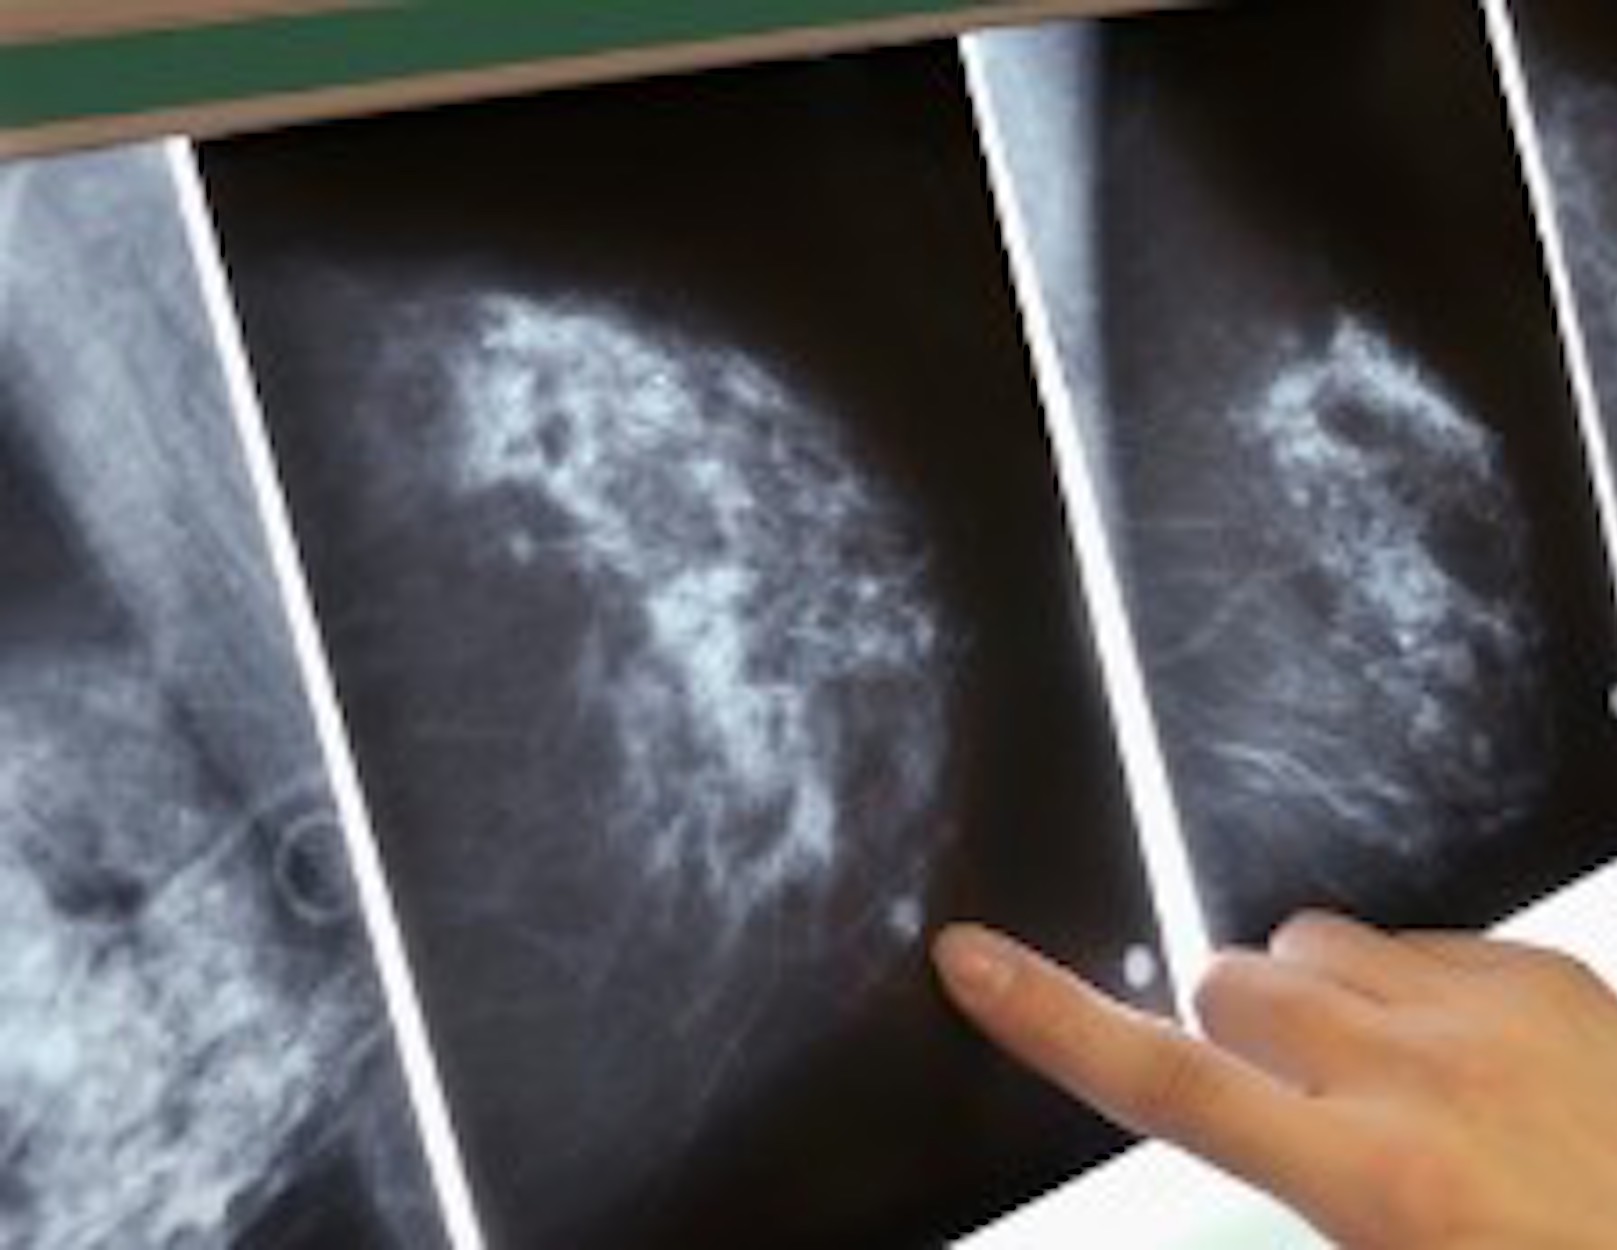  FDA Proposes Changes to Mammography Standards for First Time in More than 20 Years